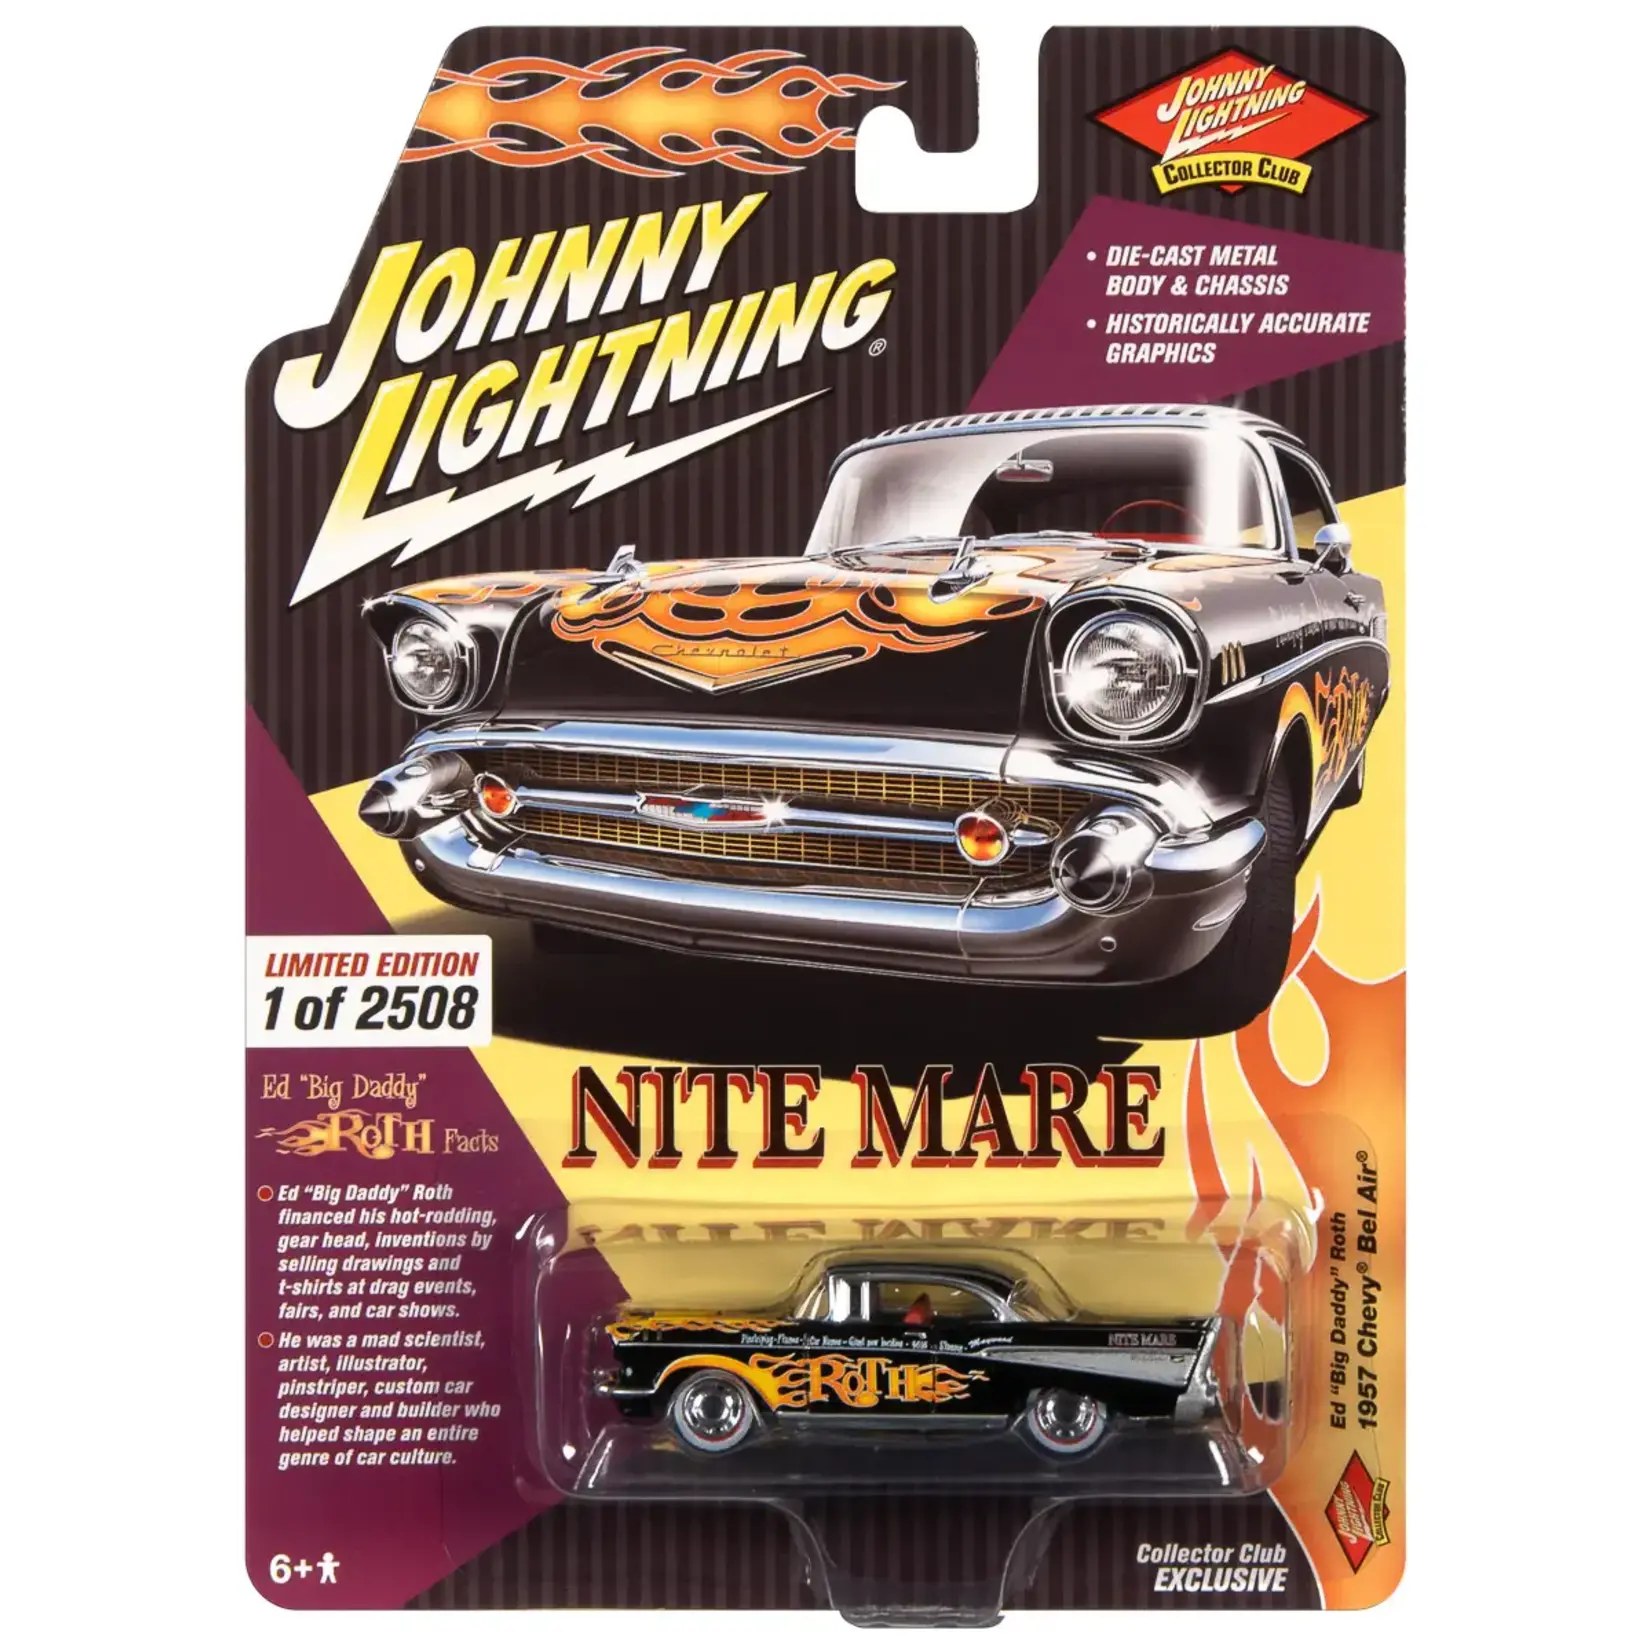 Johnny Lightning JLCC008 Johnny Lightning 1957 Chevy Bel Air (Ed Roth) (JL Collector Club Exclusive) 1:64 Scale Diecast